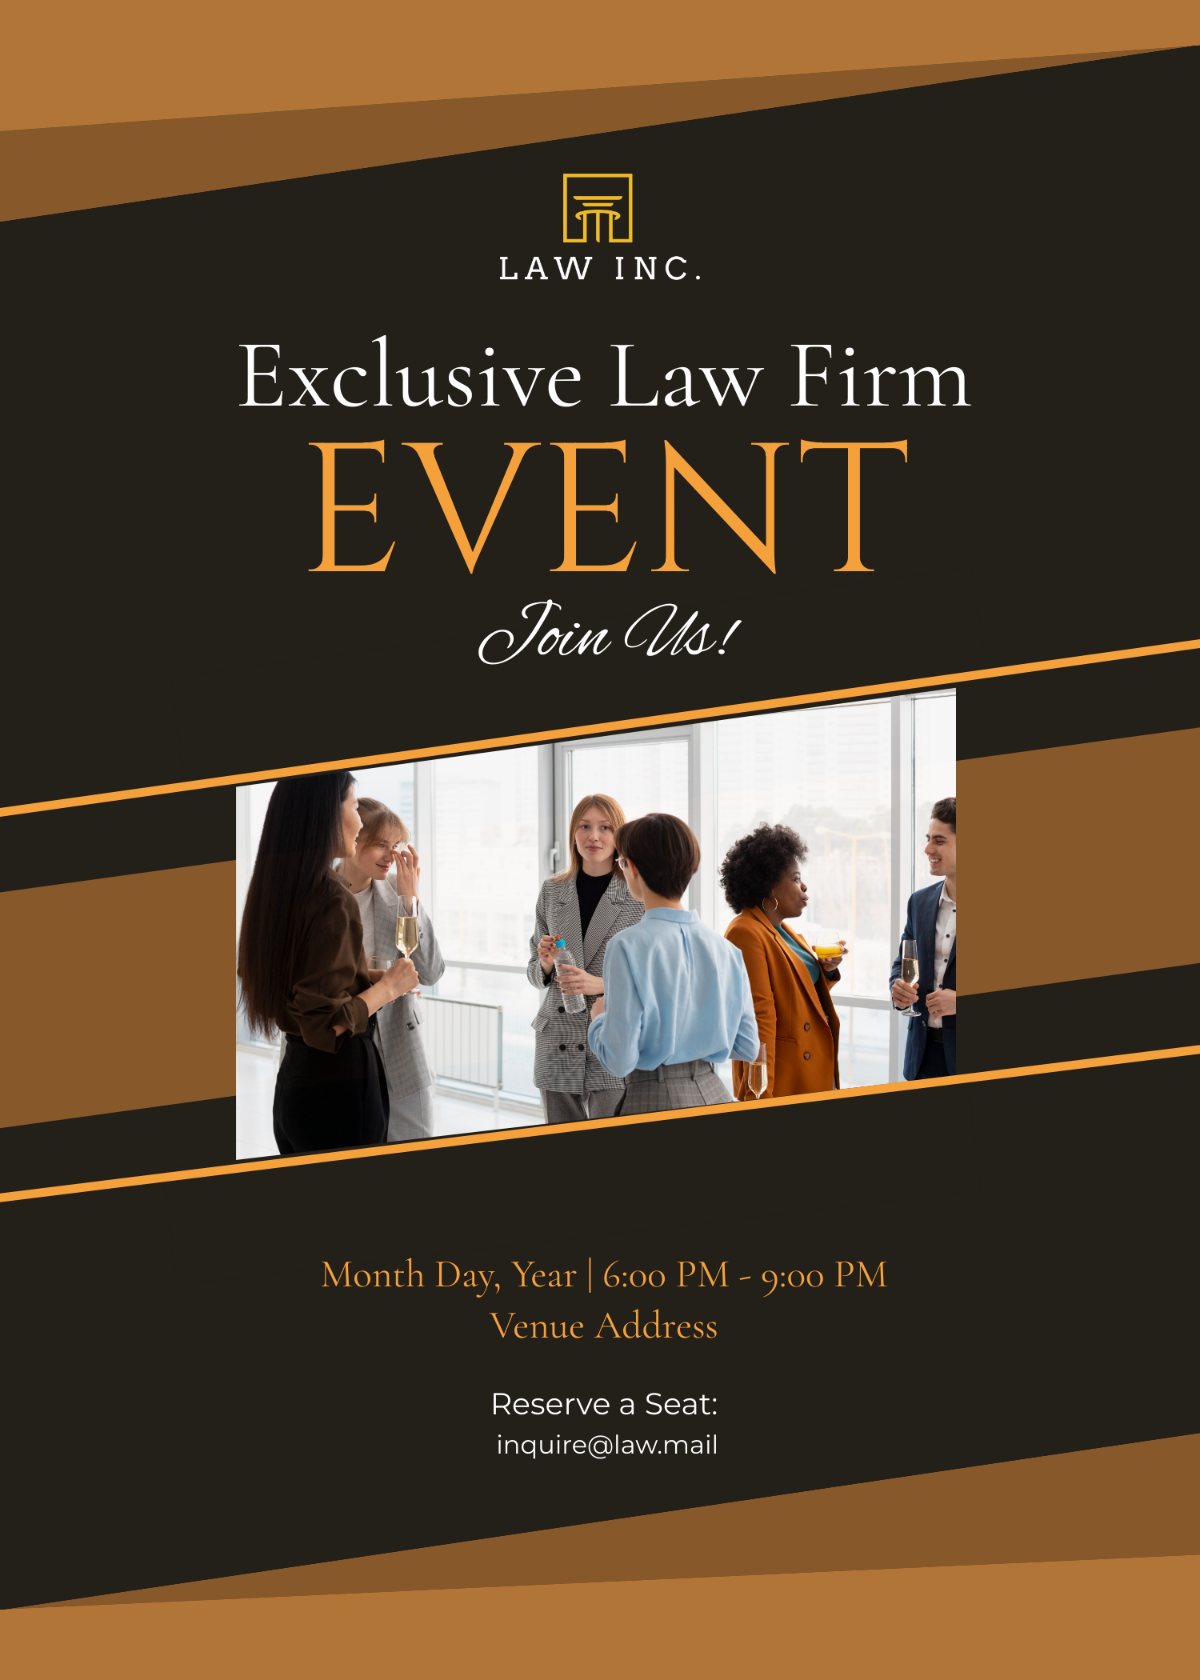 Law Firm Event Invitation Template